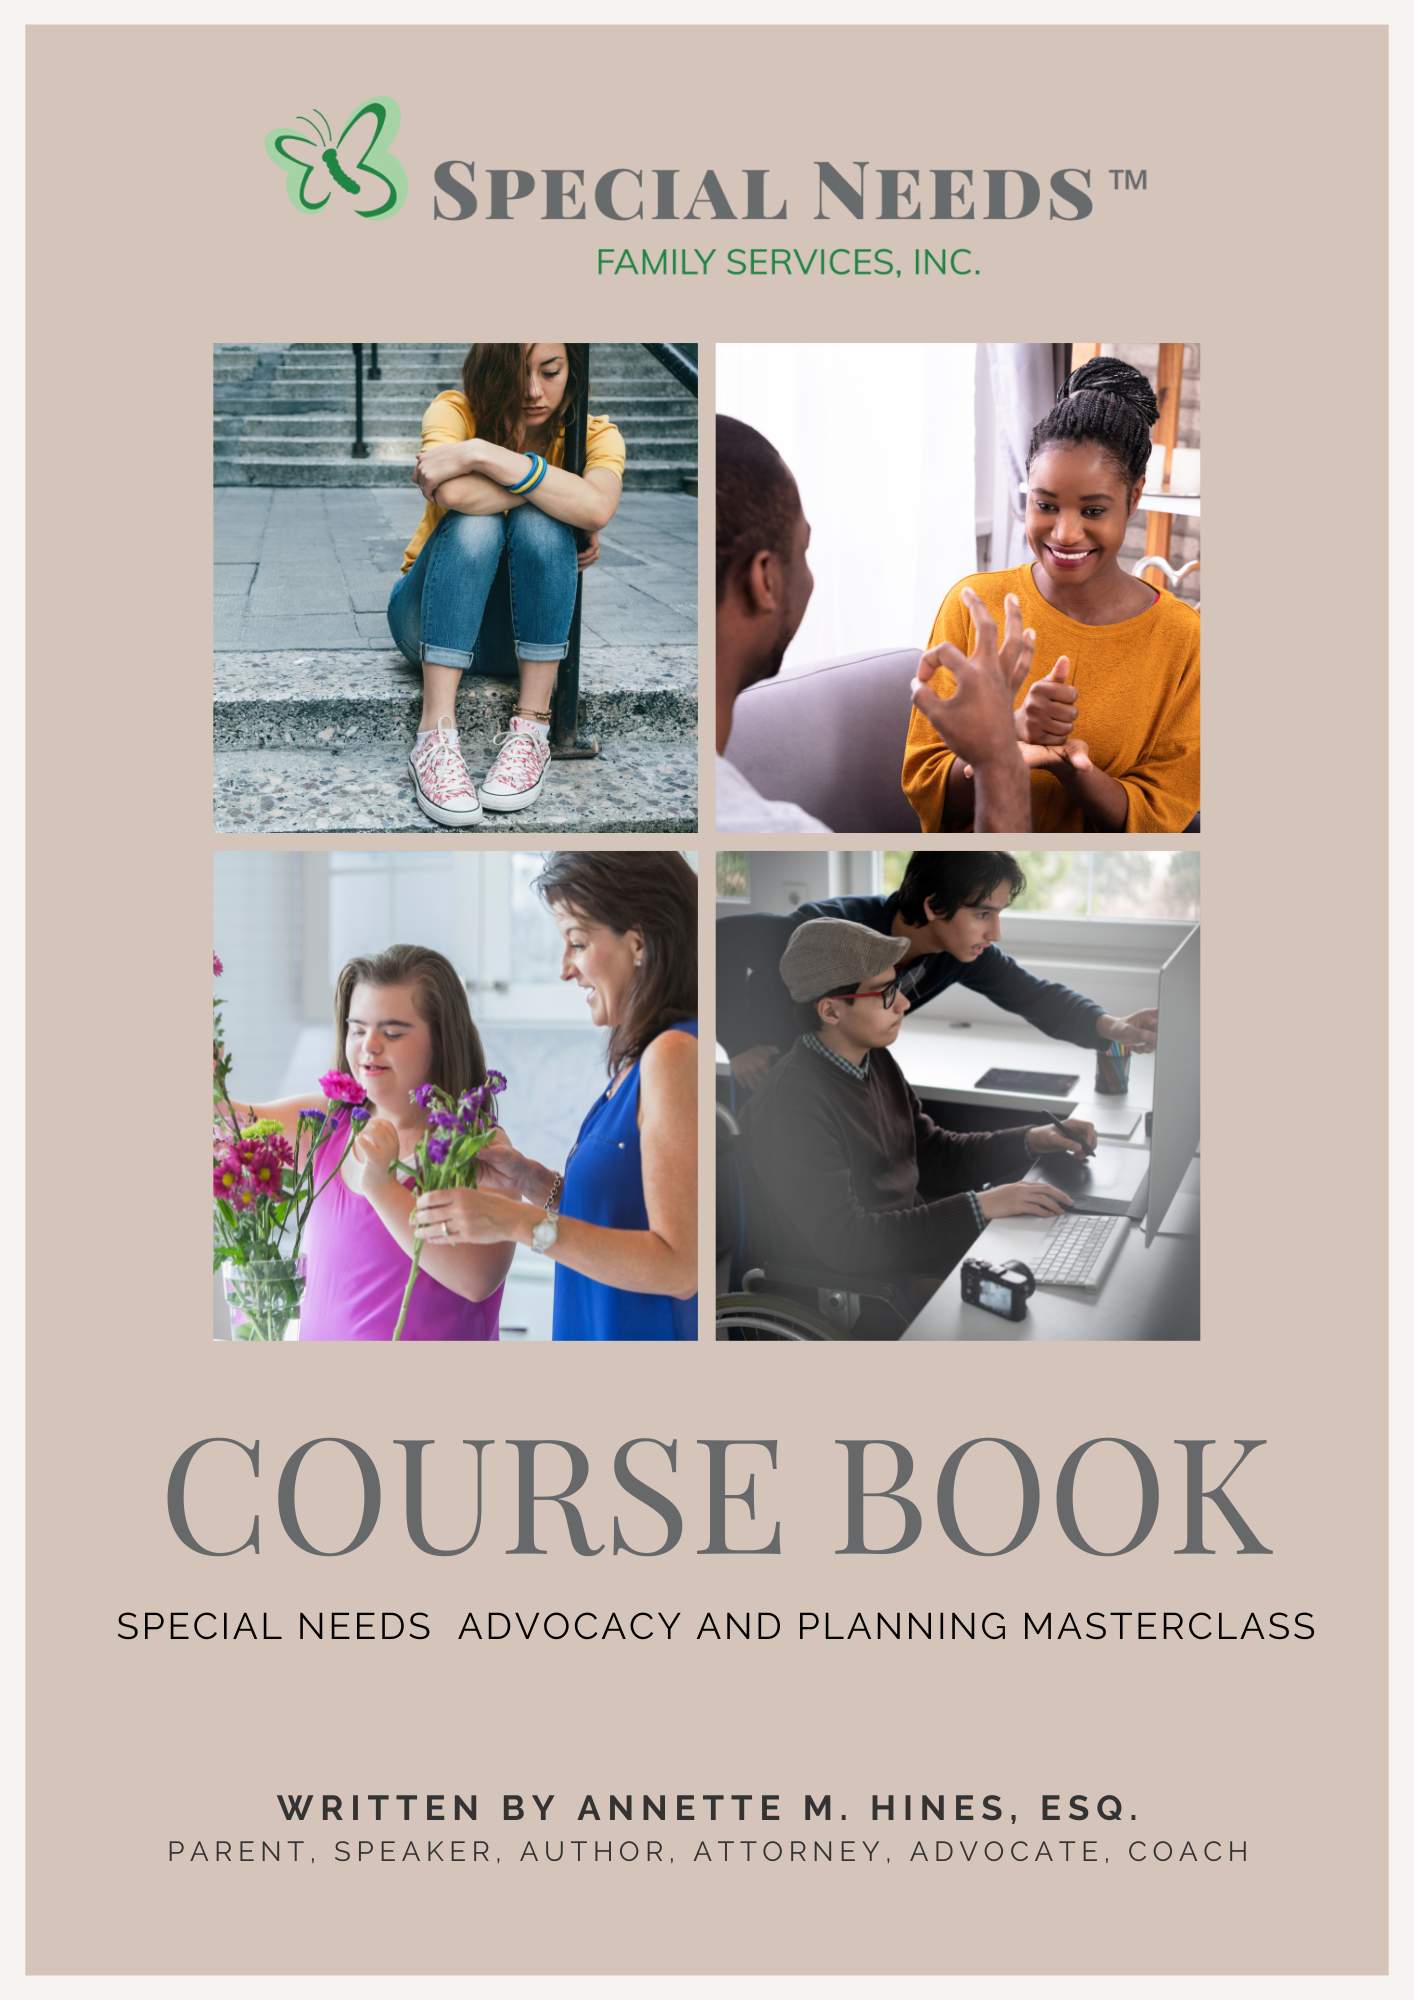 Special Needs Advocacy and Planning Masterclass Course Book Cover